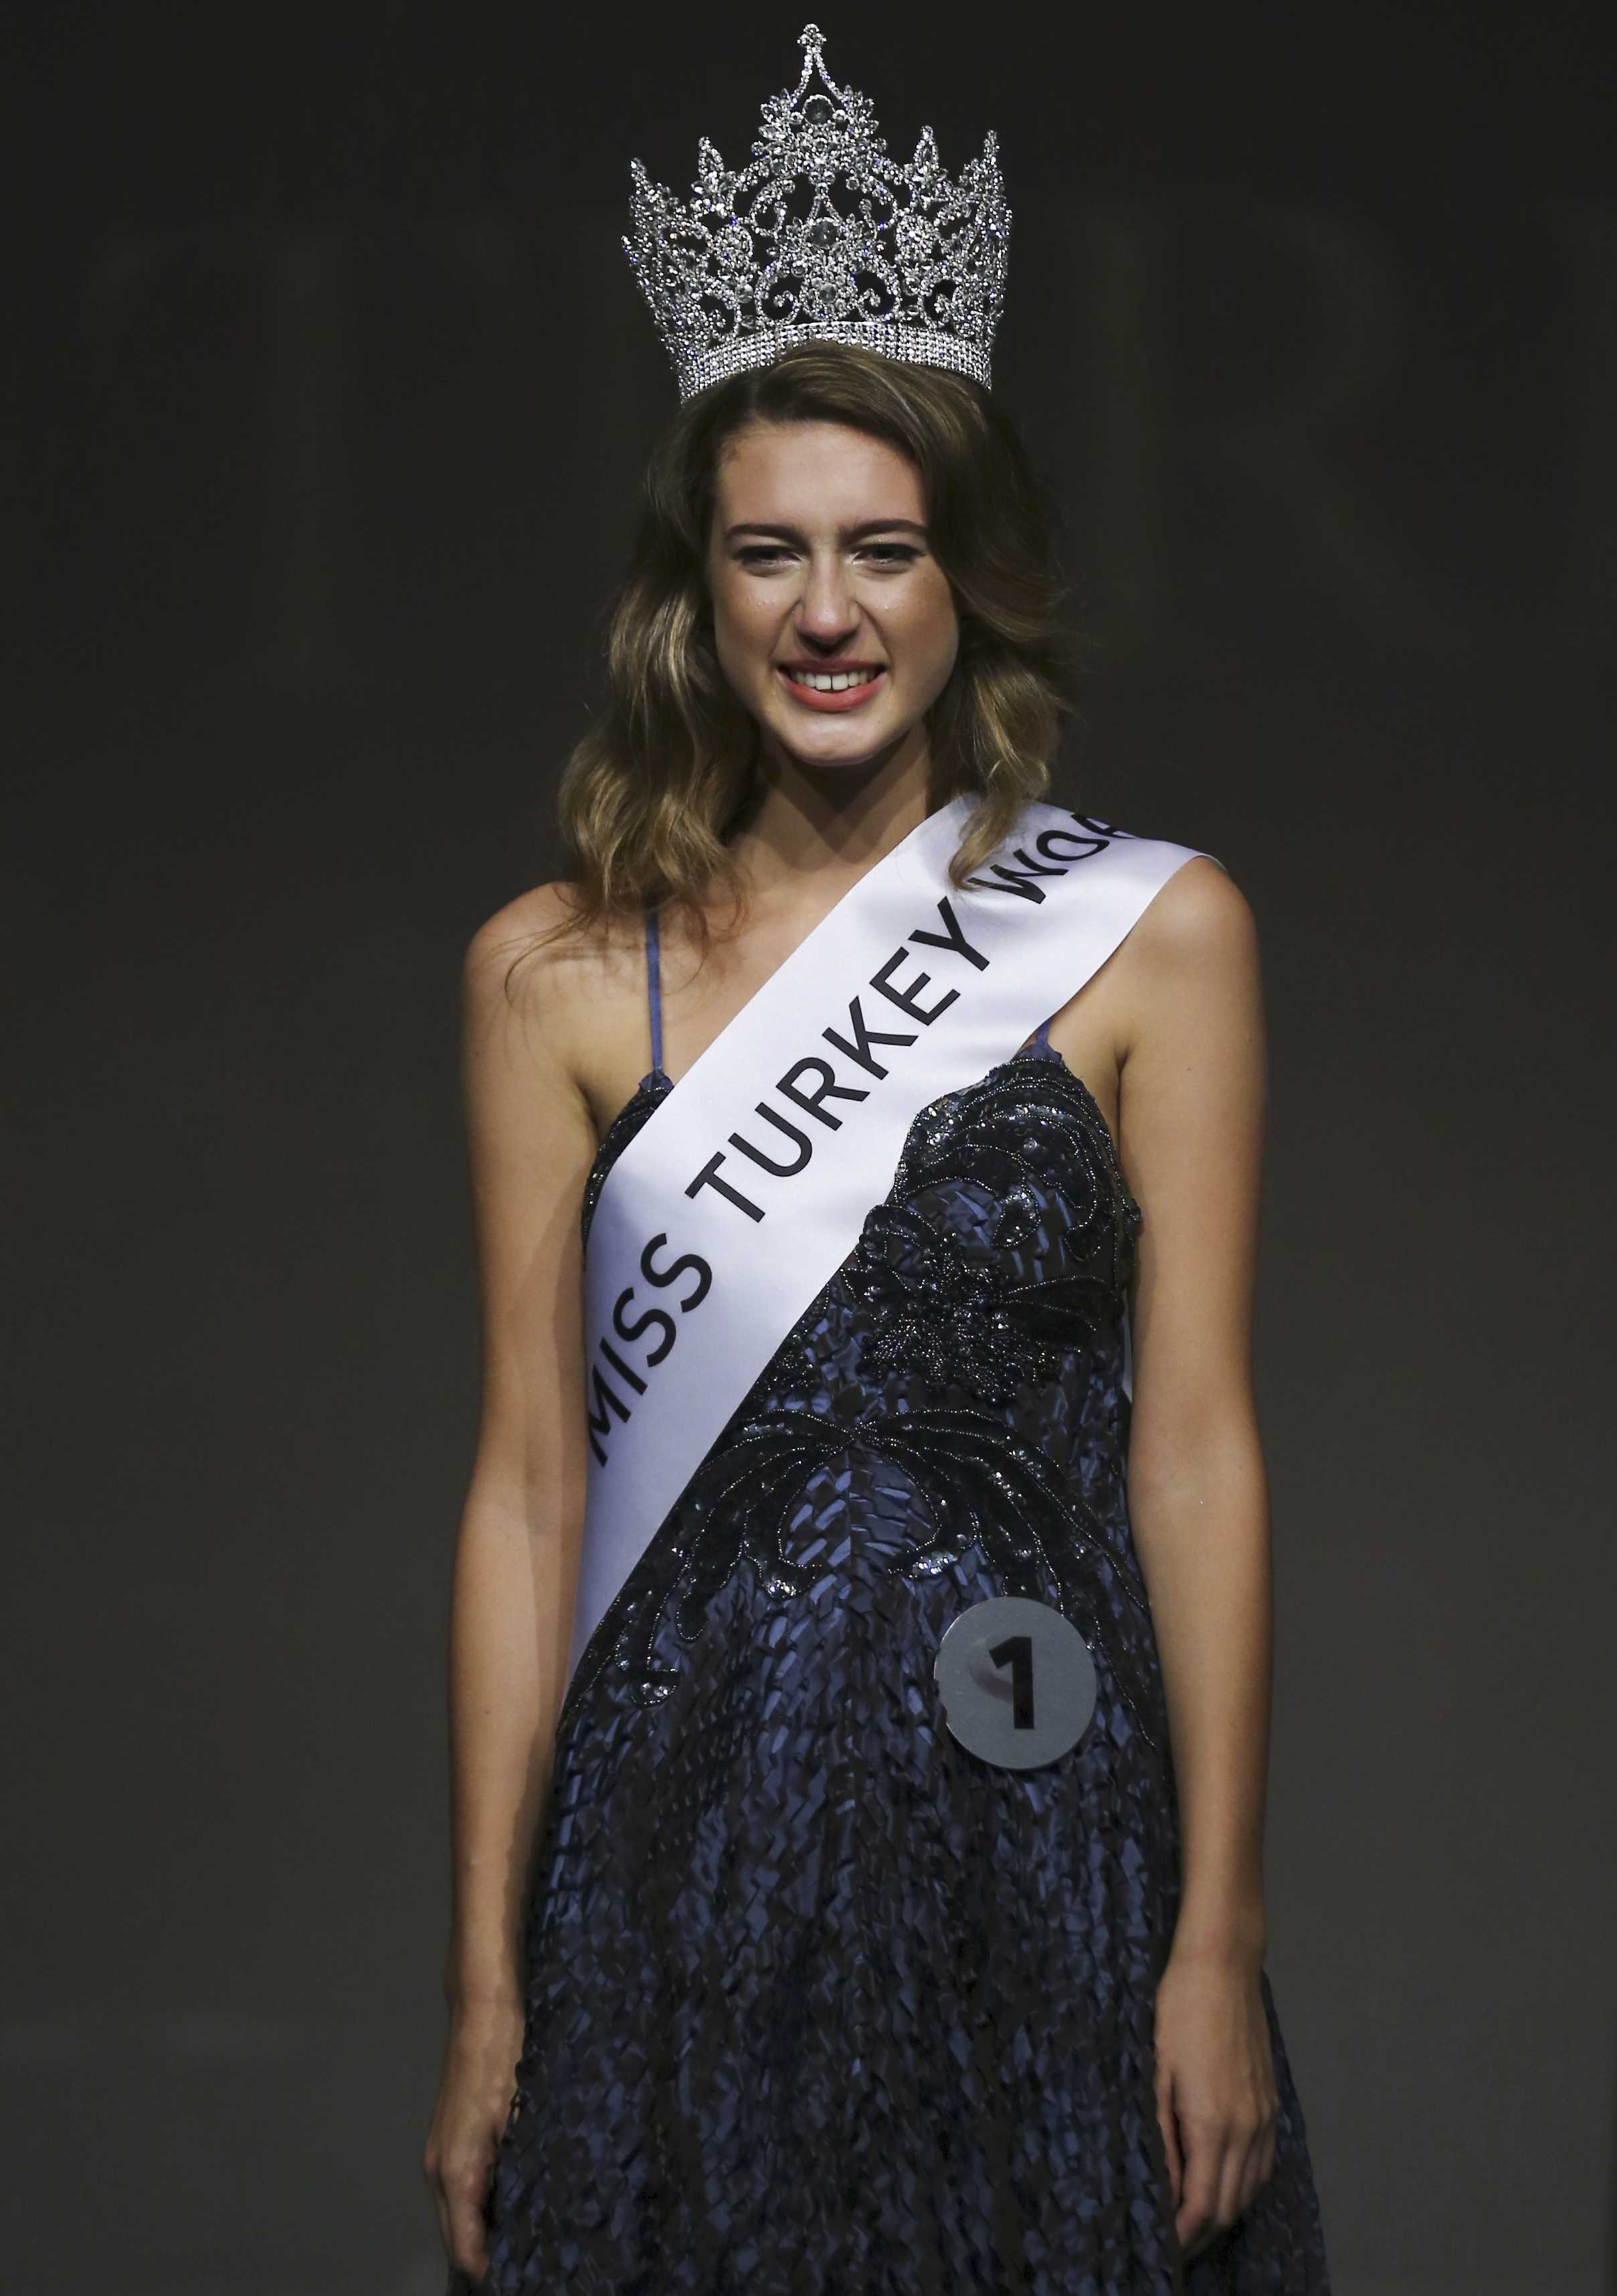 Miss Turkey loses crown over controversial tweet